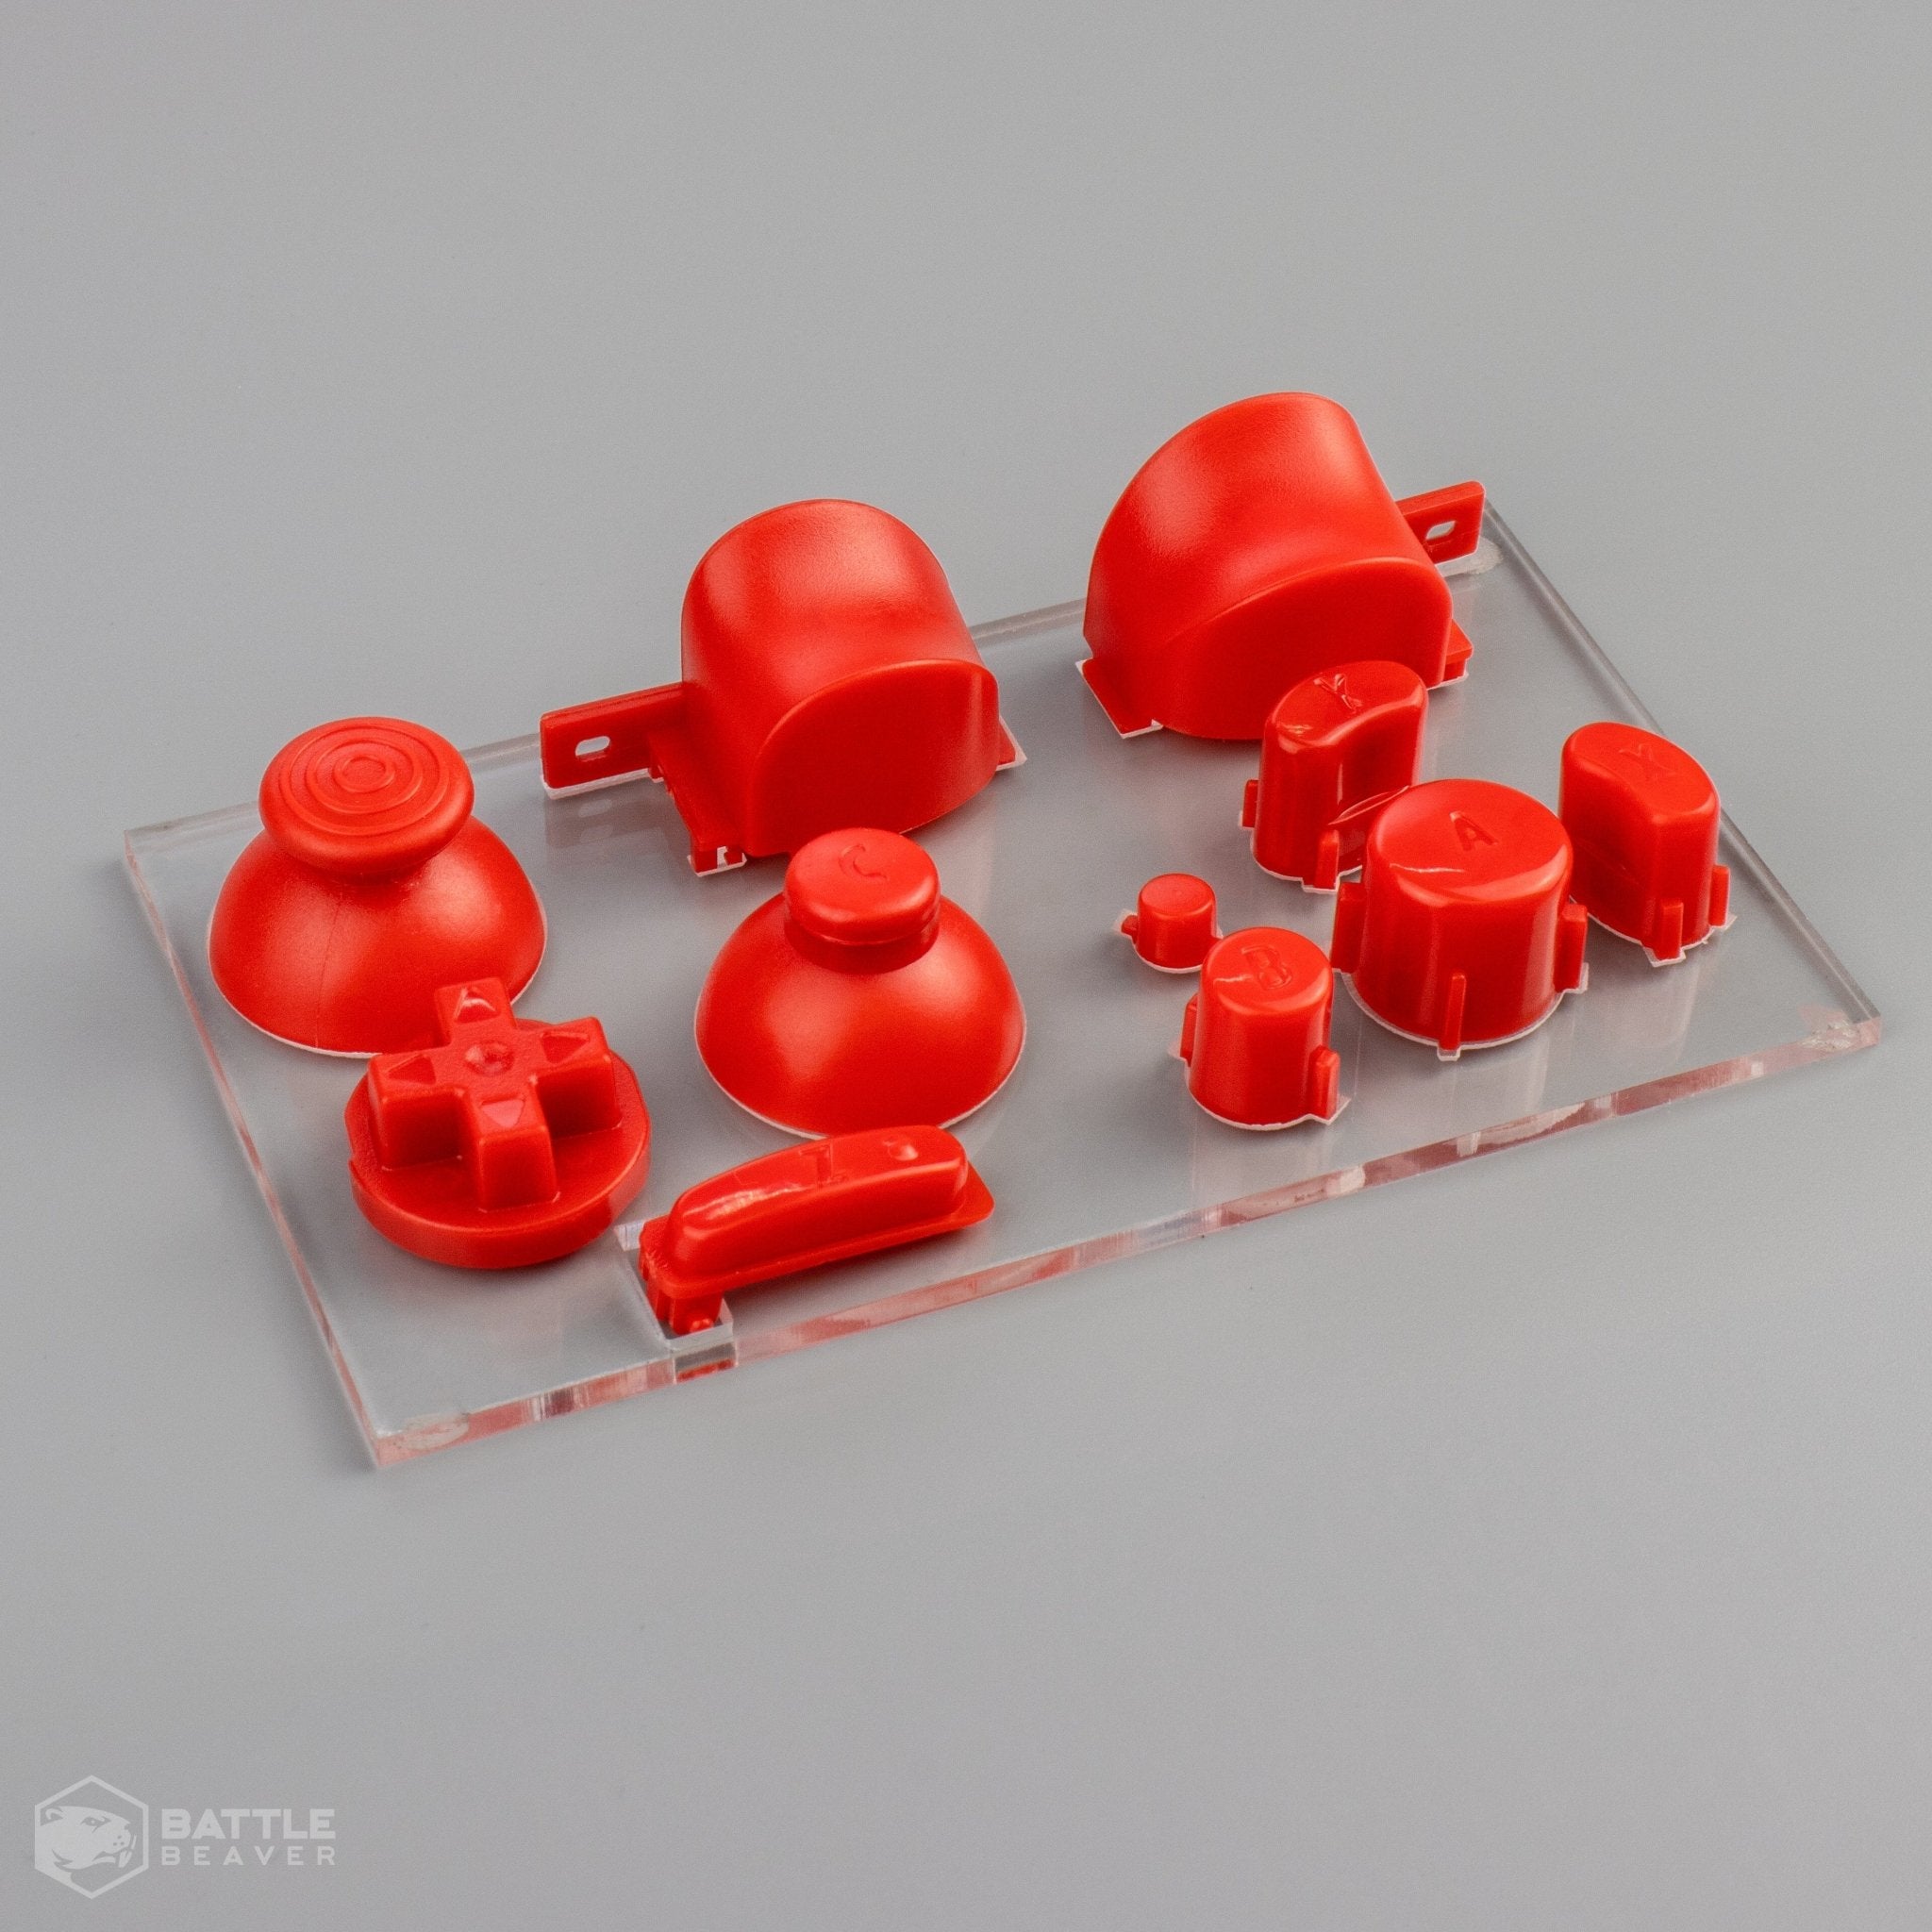 3rd Party Gamecube Parts Kit - Battle Beaver Customs - Red